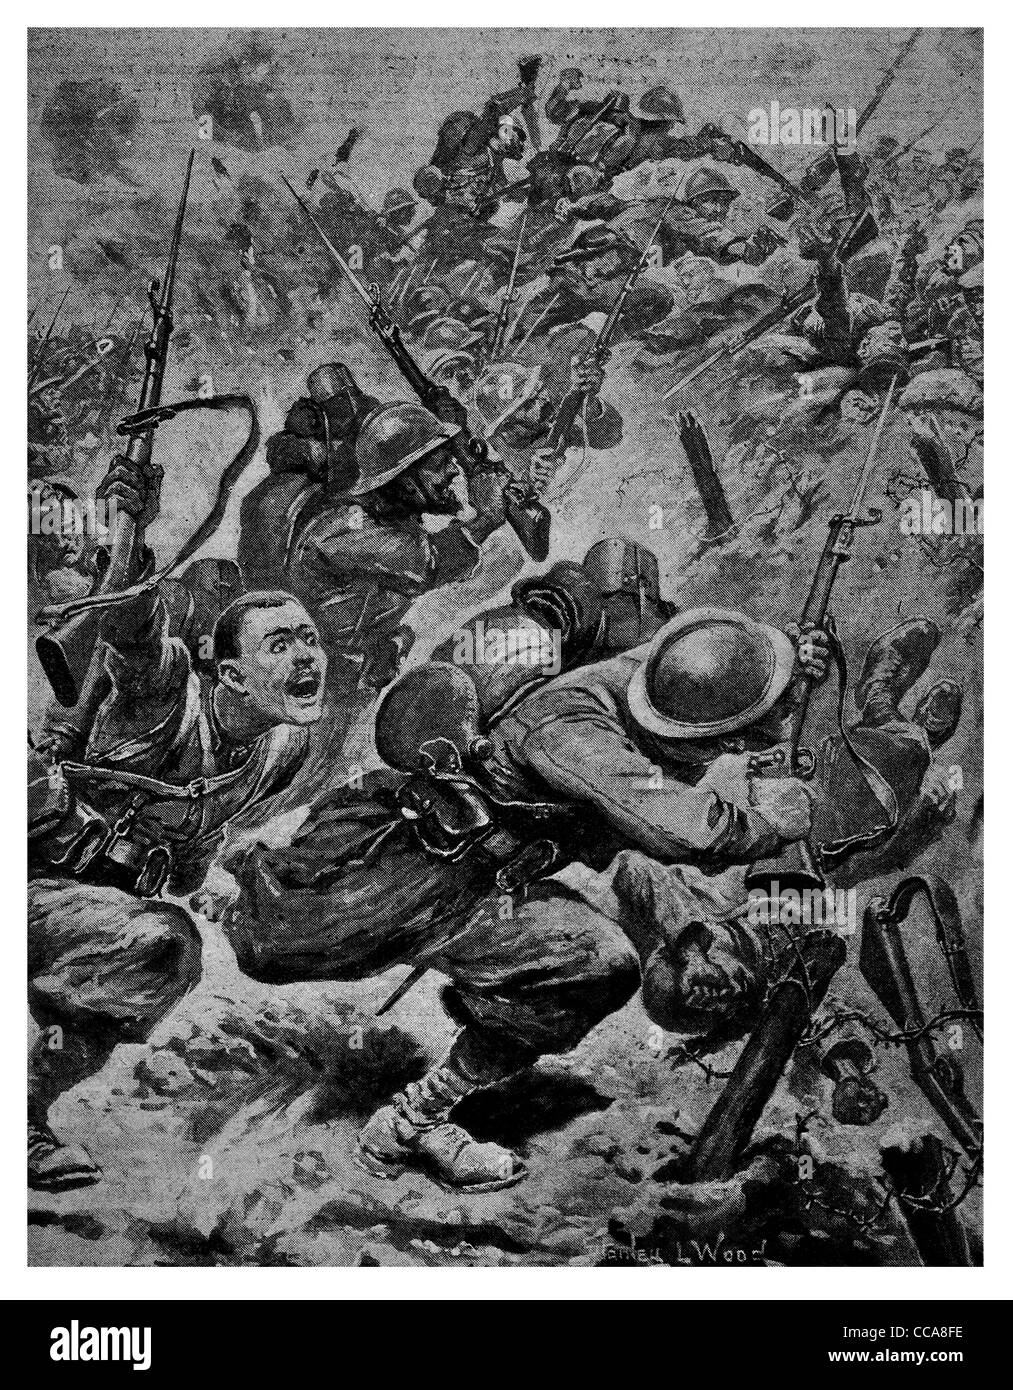 1916 Hill 1050 near Monastir French Zouaves Balkin Hill trench charge rifle bayonet hand to hand combat glory bravery fear Stock Photo